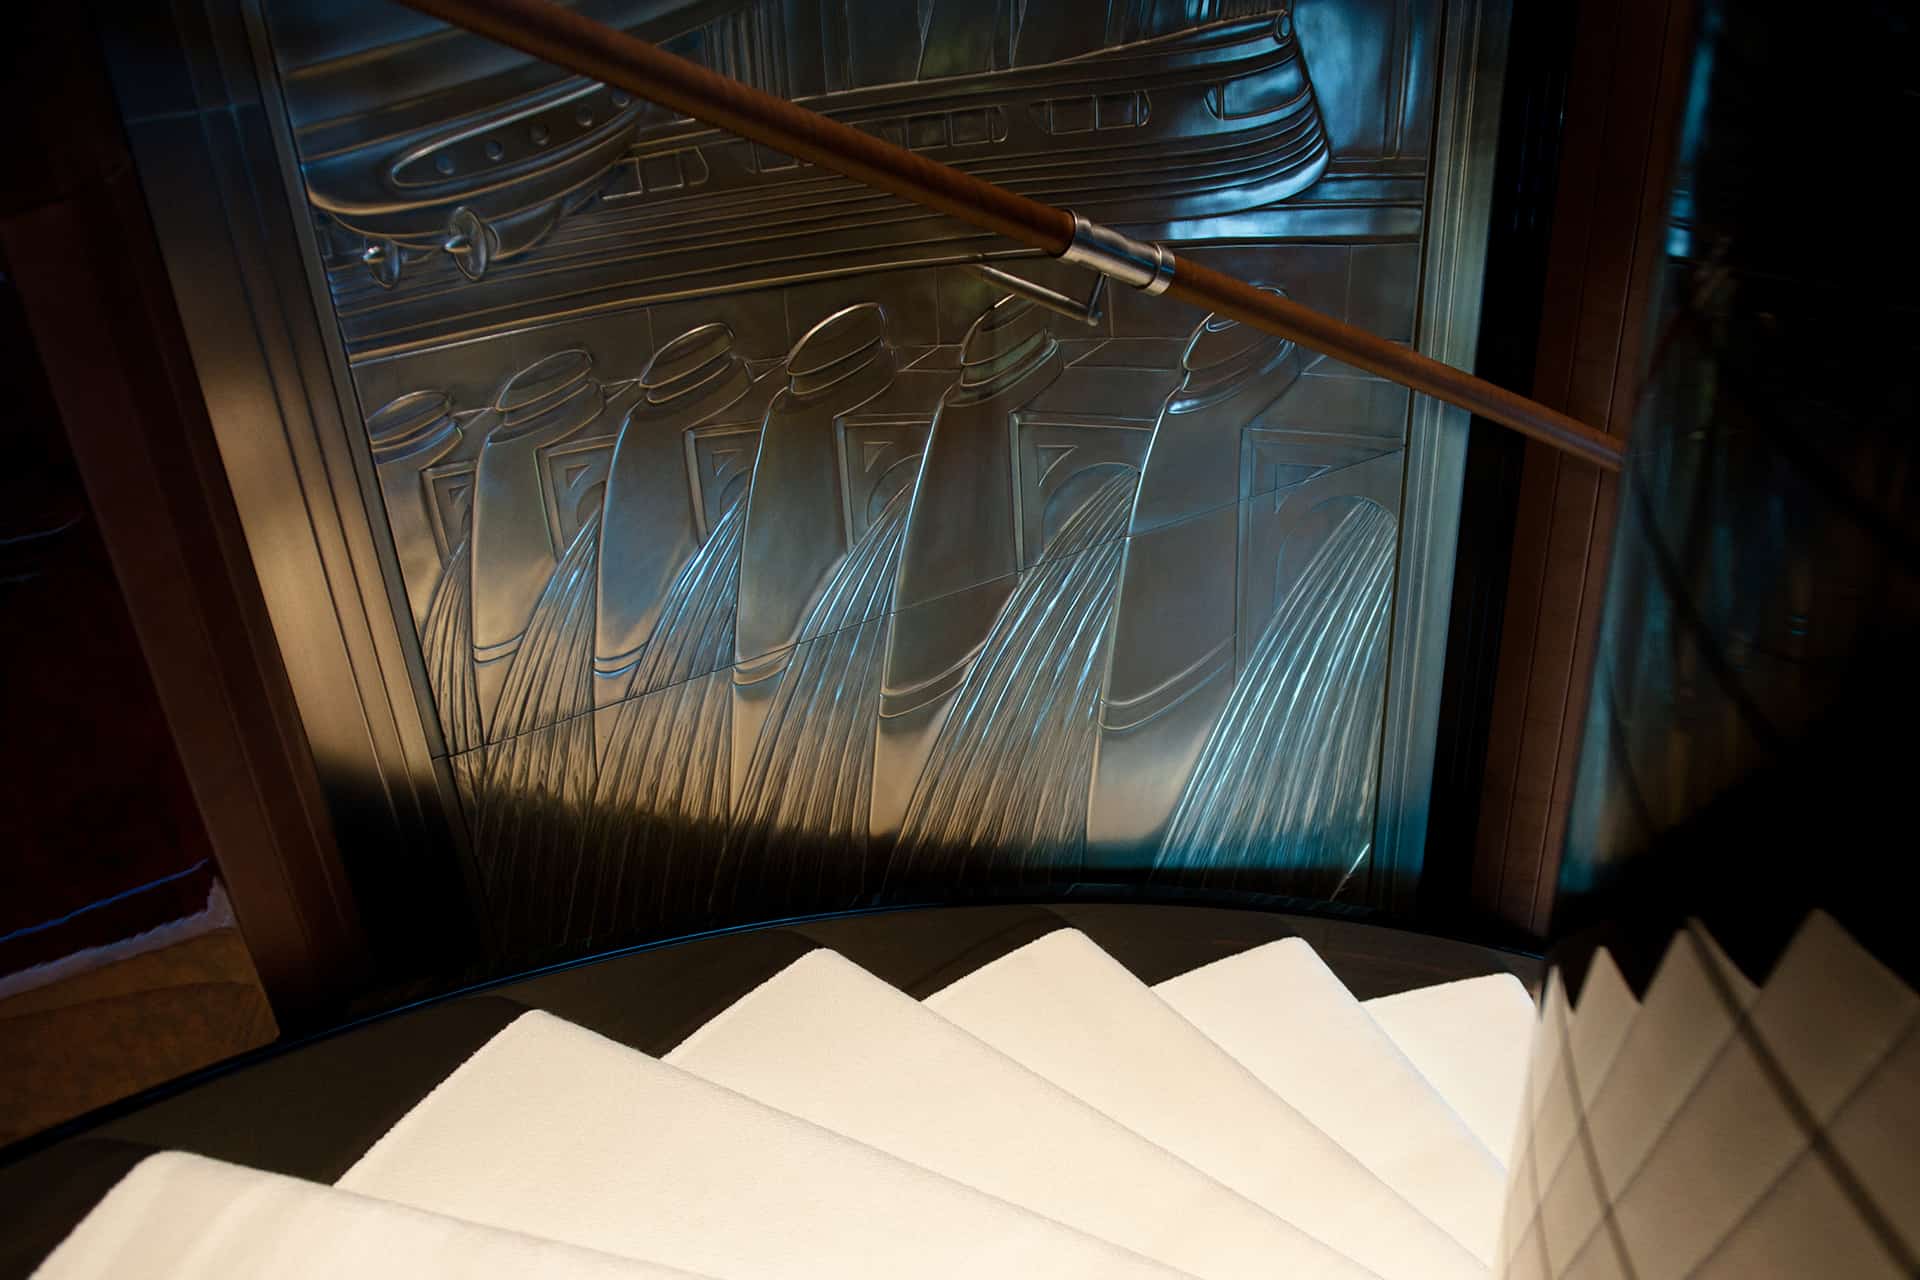 Metal finish bas-relief onboard M/Y Excellence V. Photo by Mark Simms.